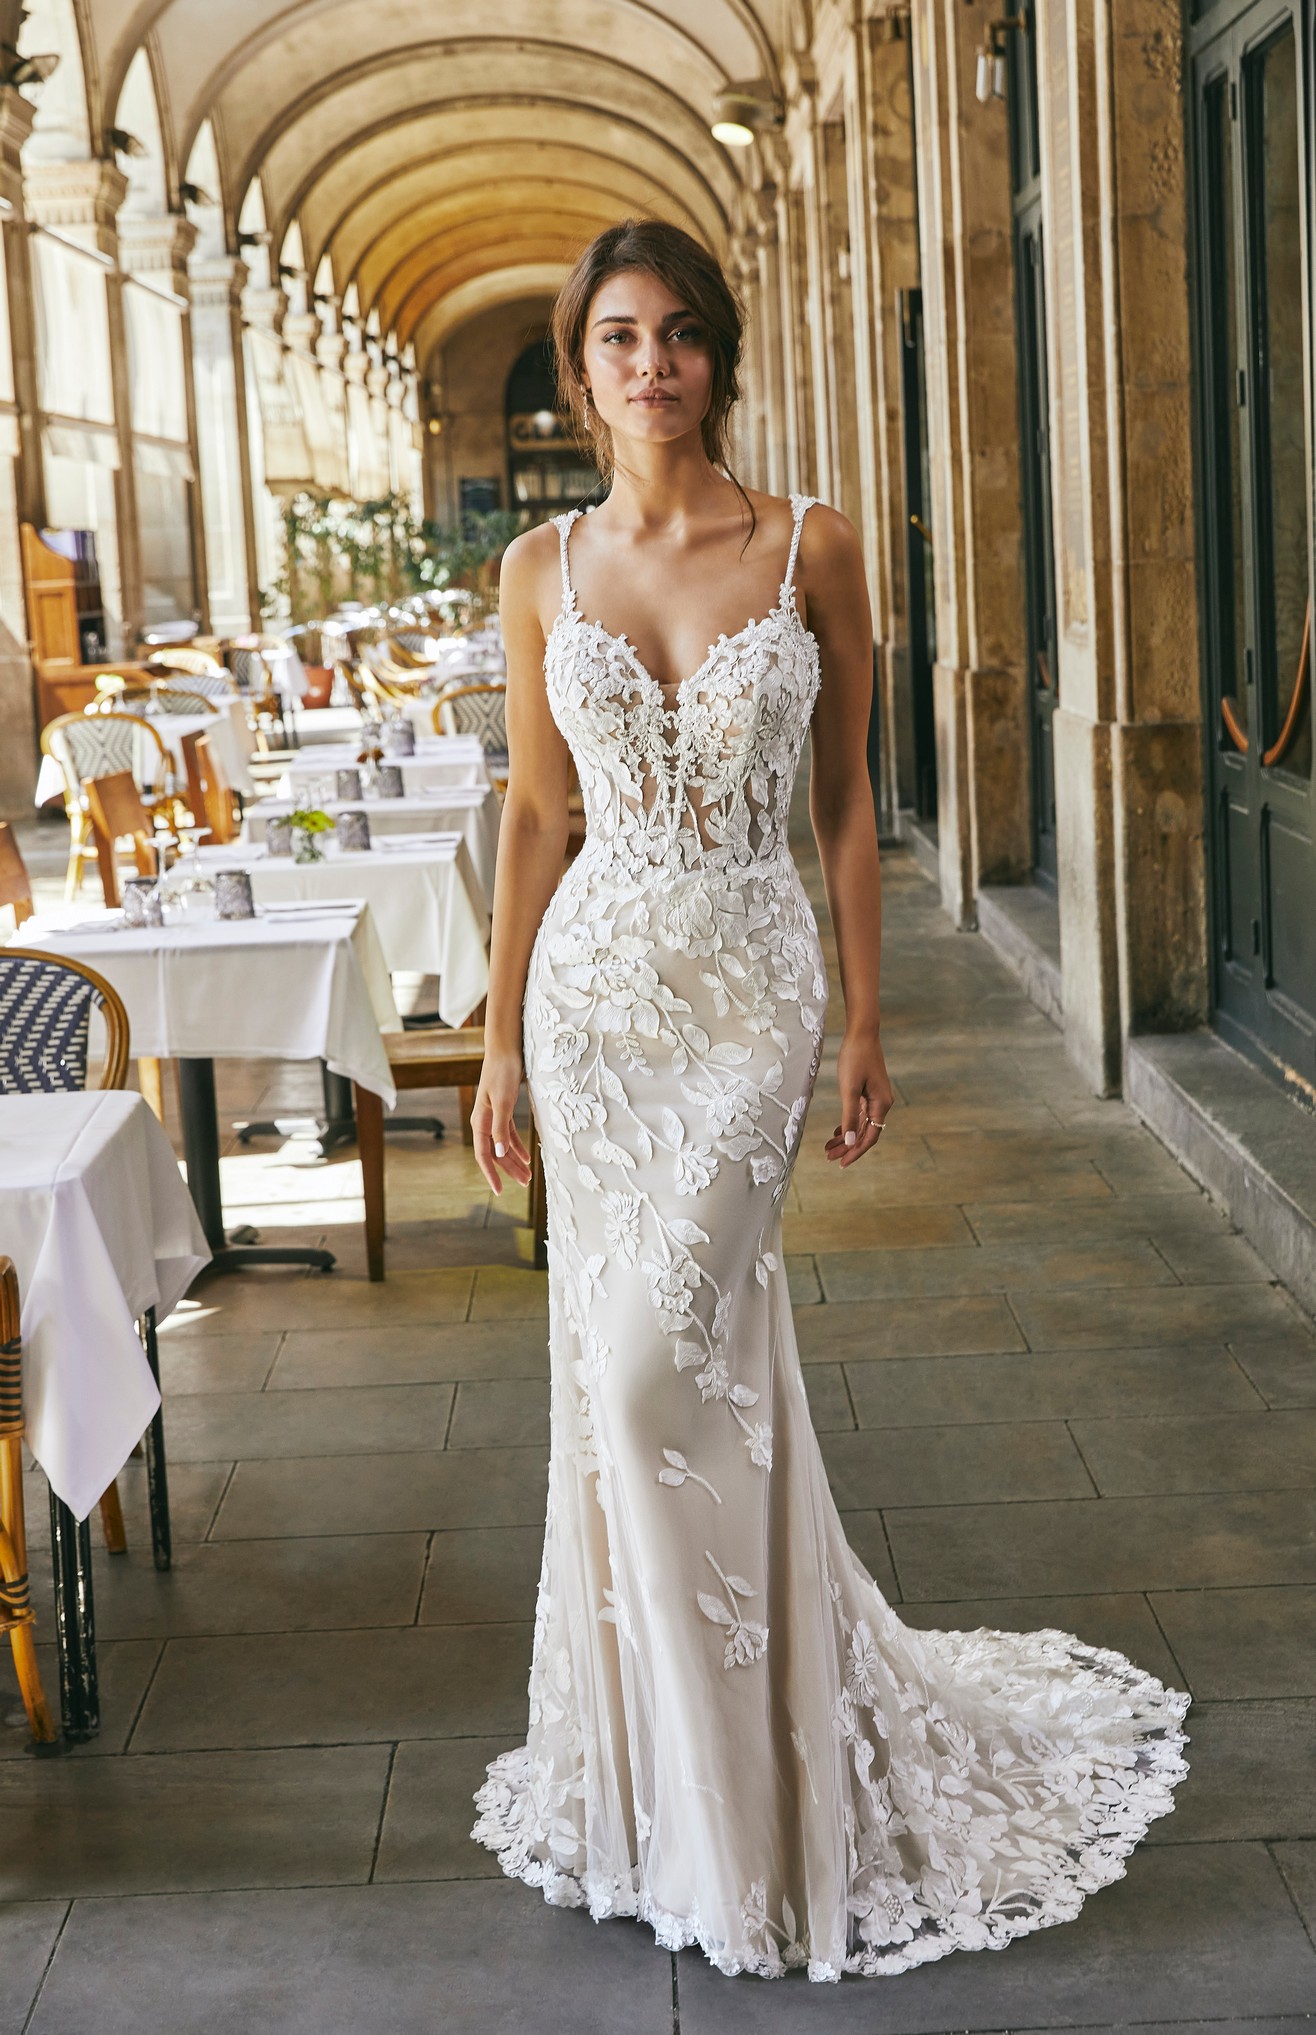 Lady standing in outdoor cafe wearing fit and flare tulle and lace applique wedding dress with sweetheart neckline and beaded straps